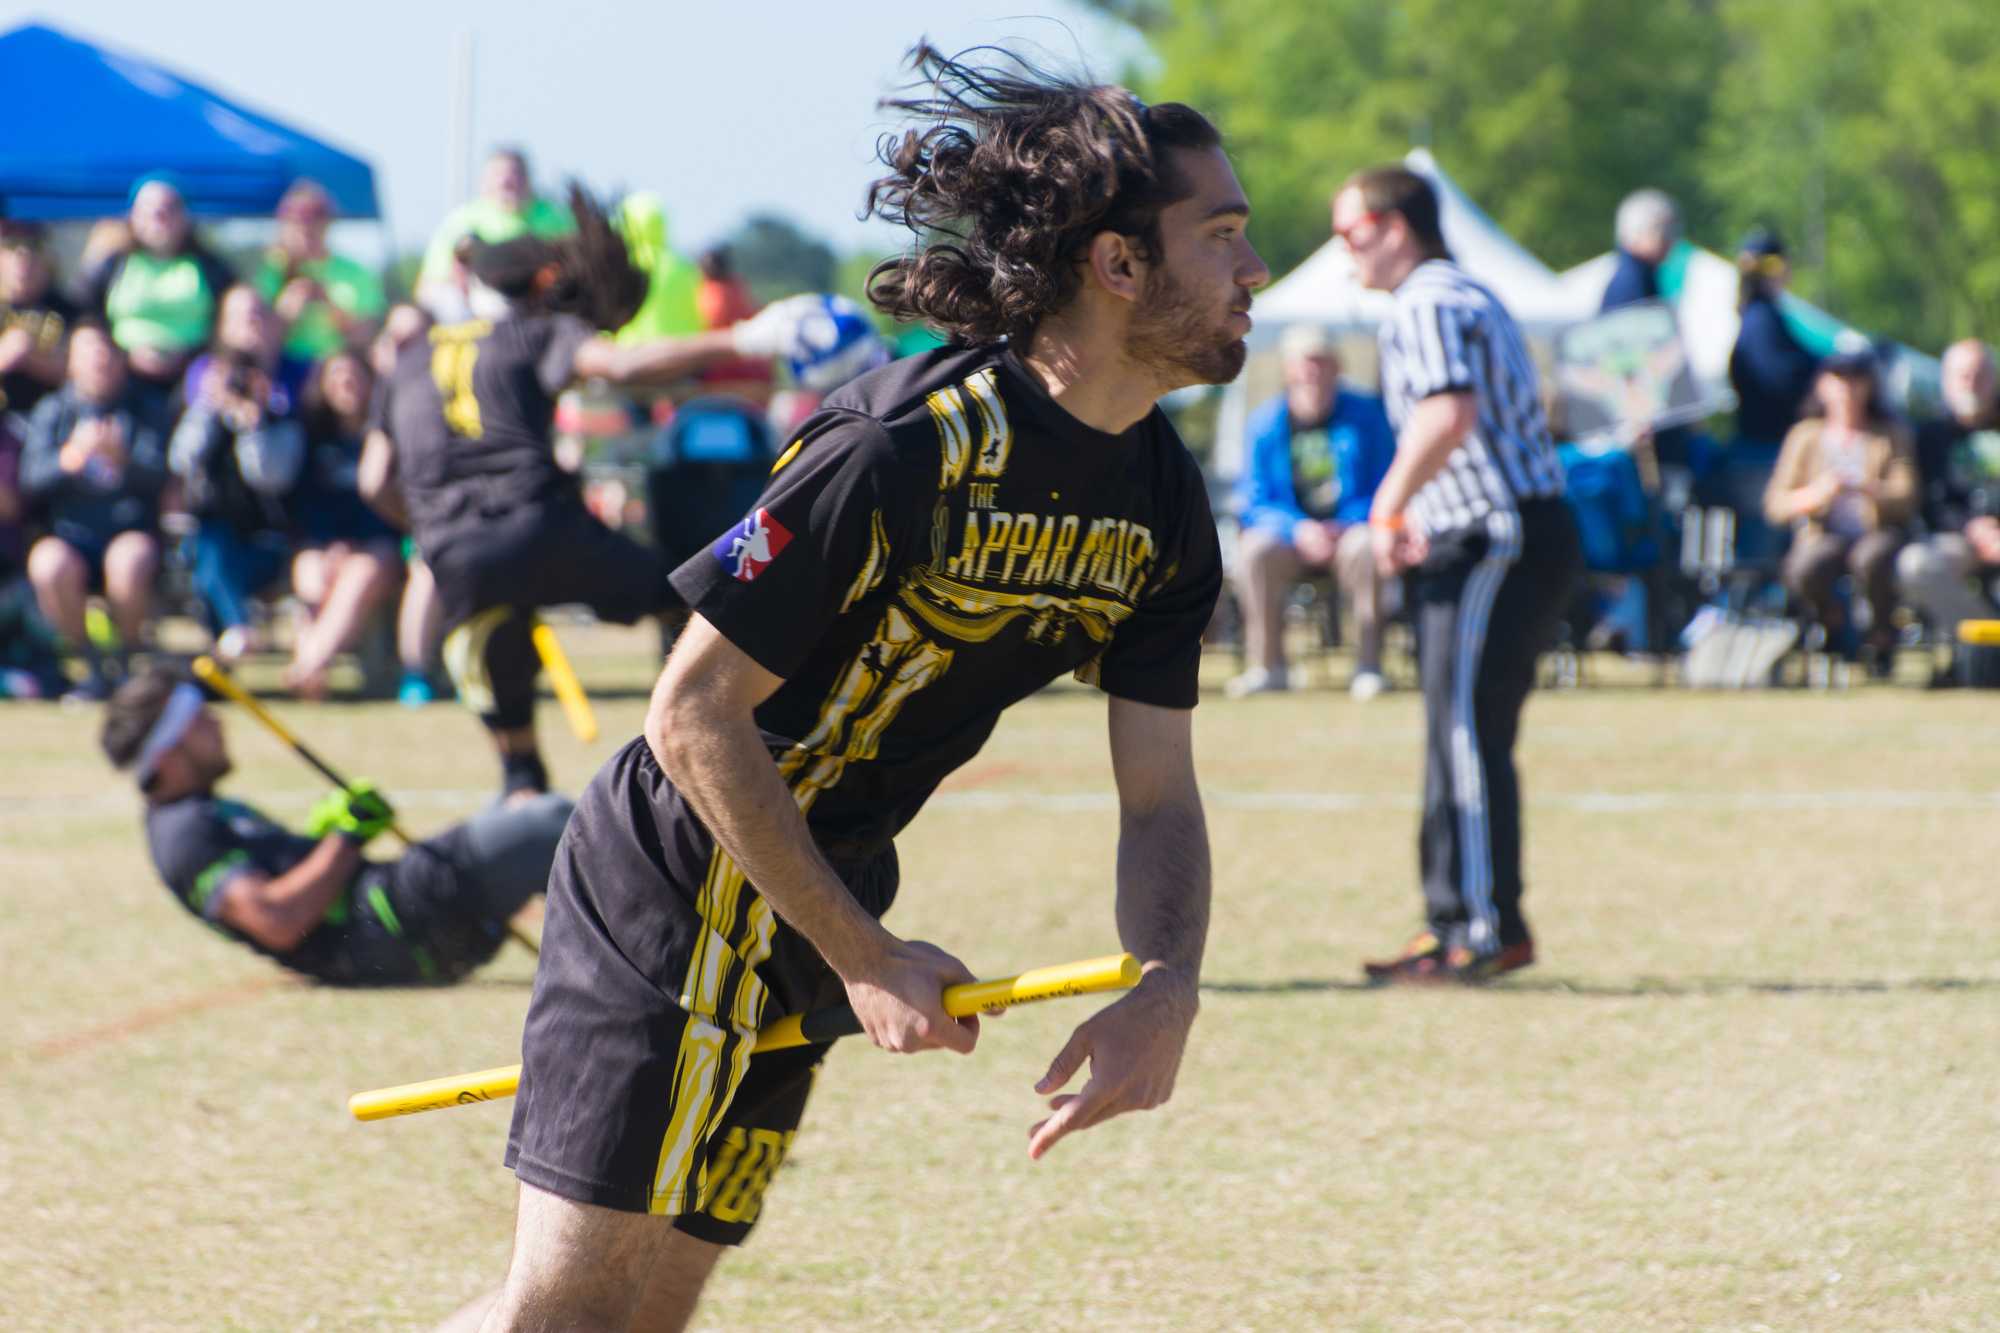 Chaser and captain Benjamin Strauss runs across the field during the game against the Silicon Valley Vipers 